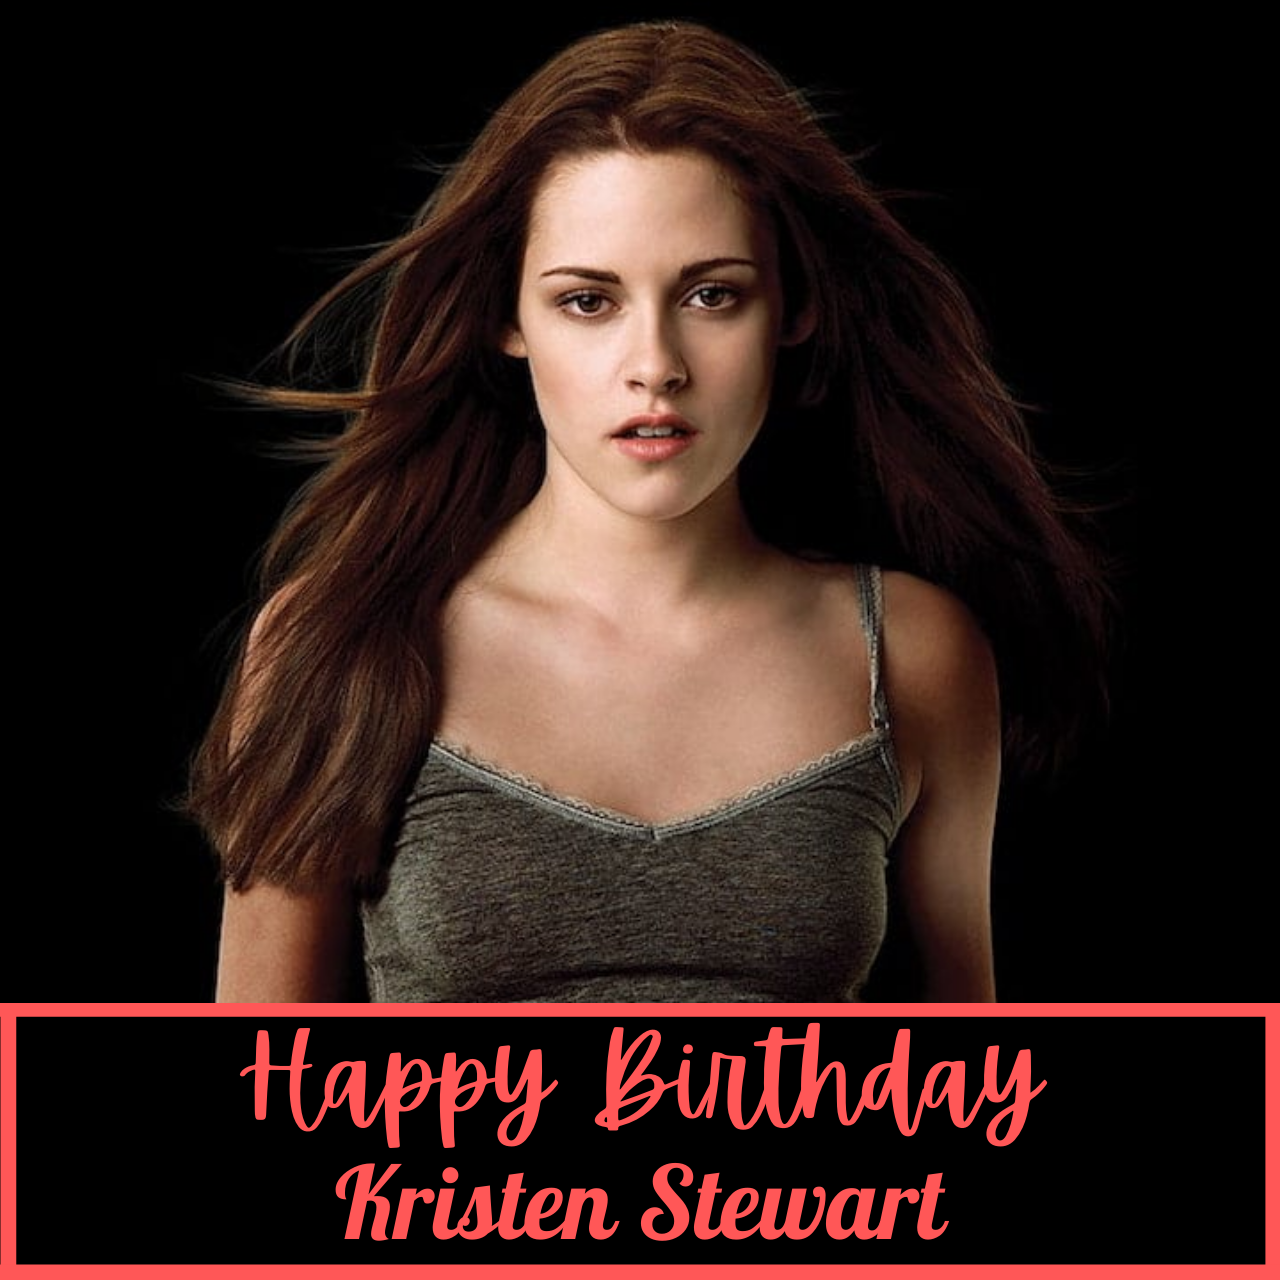 Happy Birthday Kristen Stewart: Top Wishes, Greetings, HD Images, Messages, And Quotes To Greet "Twilight" Star